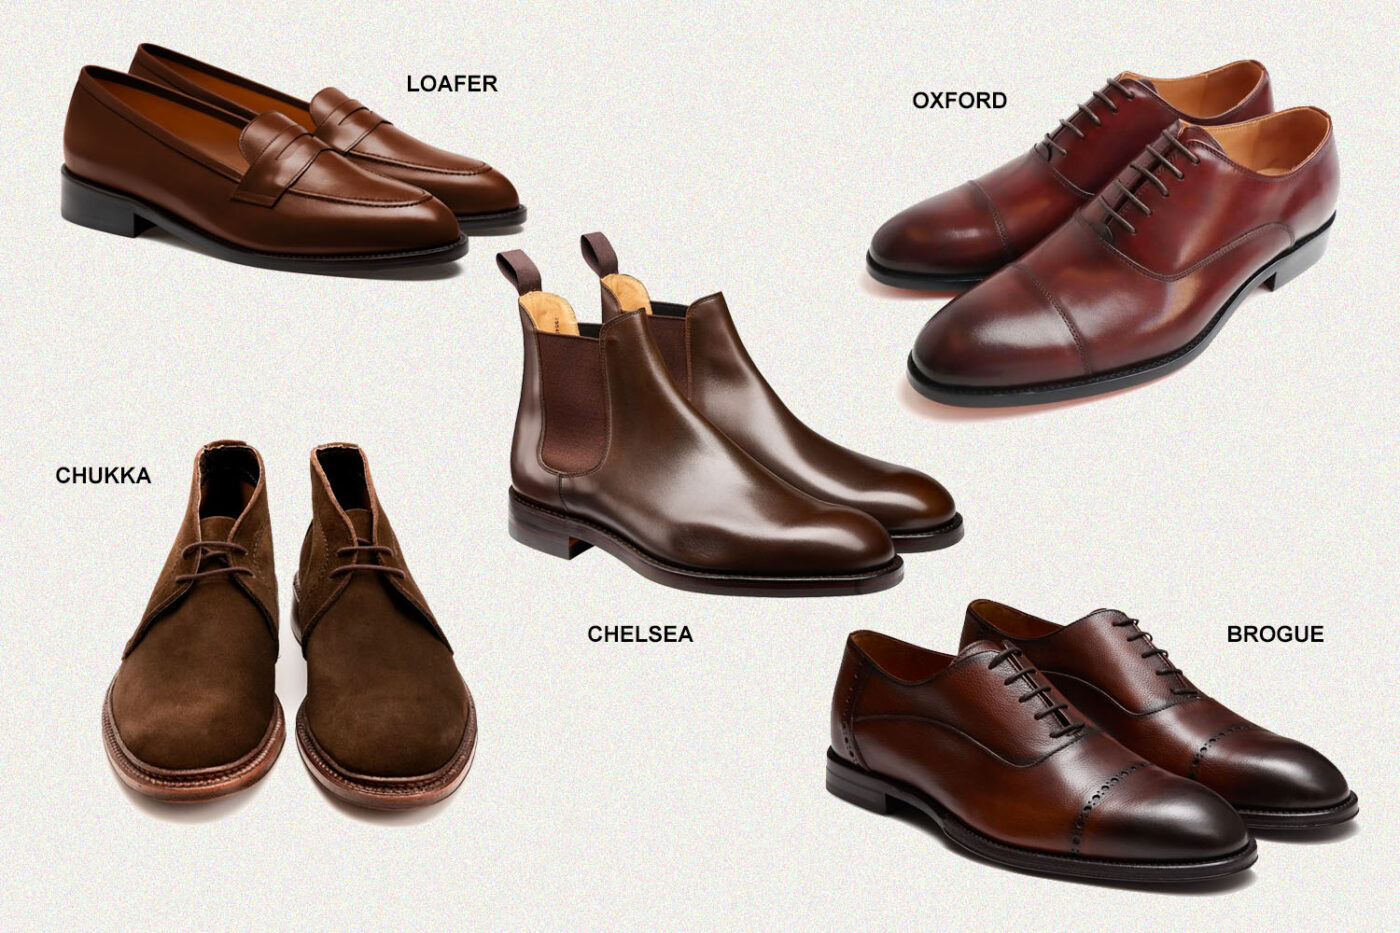 What color shoes should I wear with black trousers? - Quora